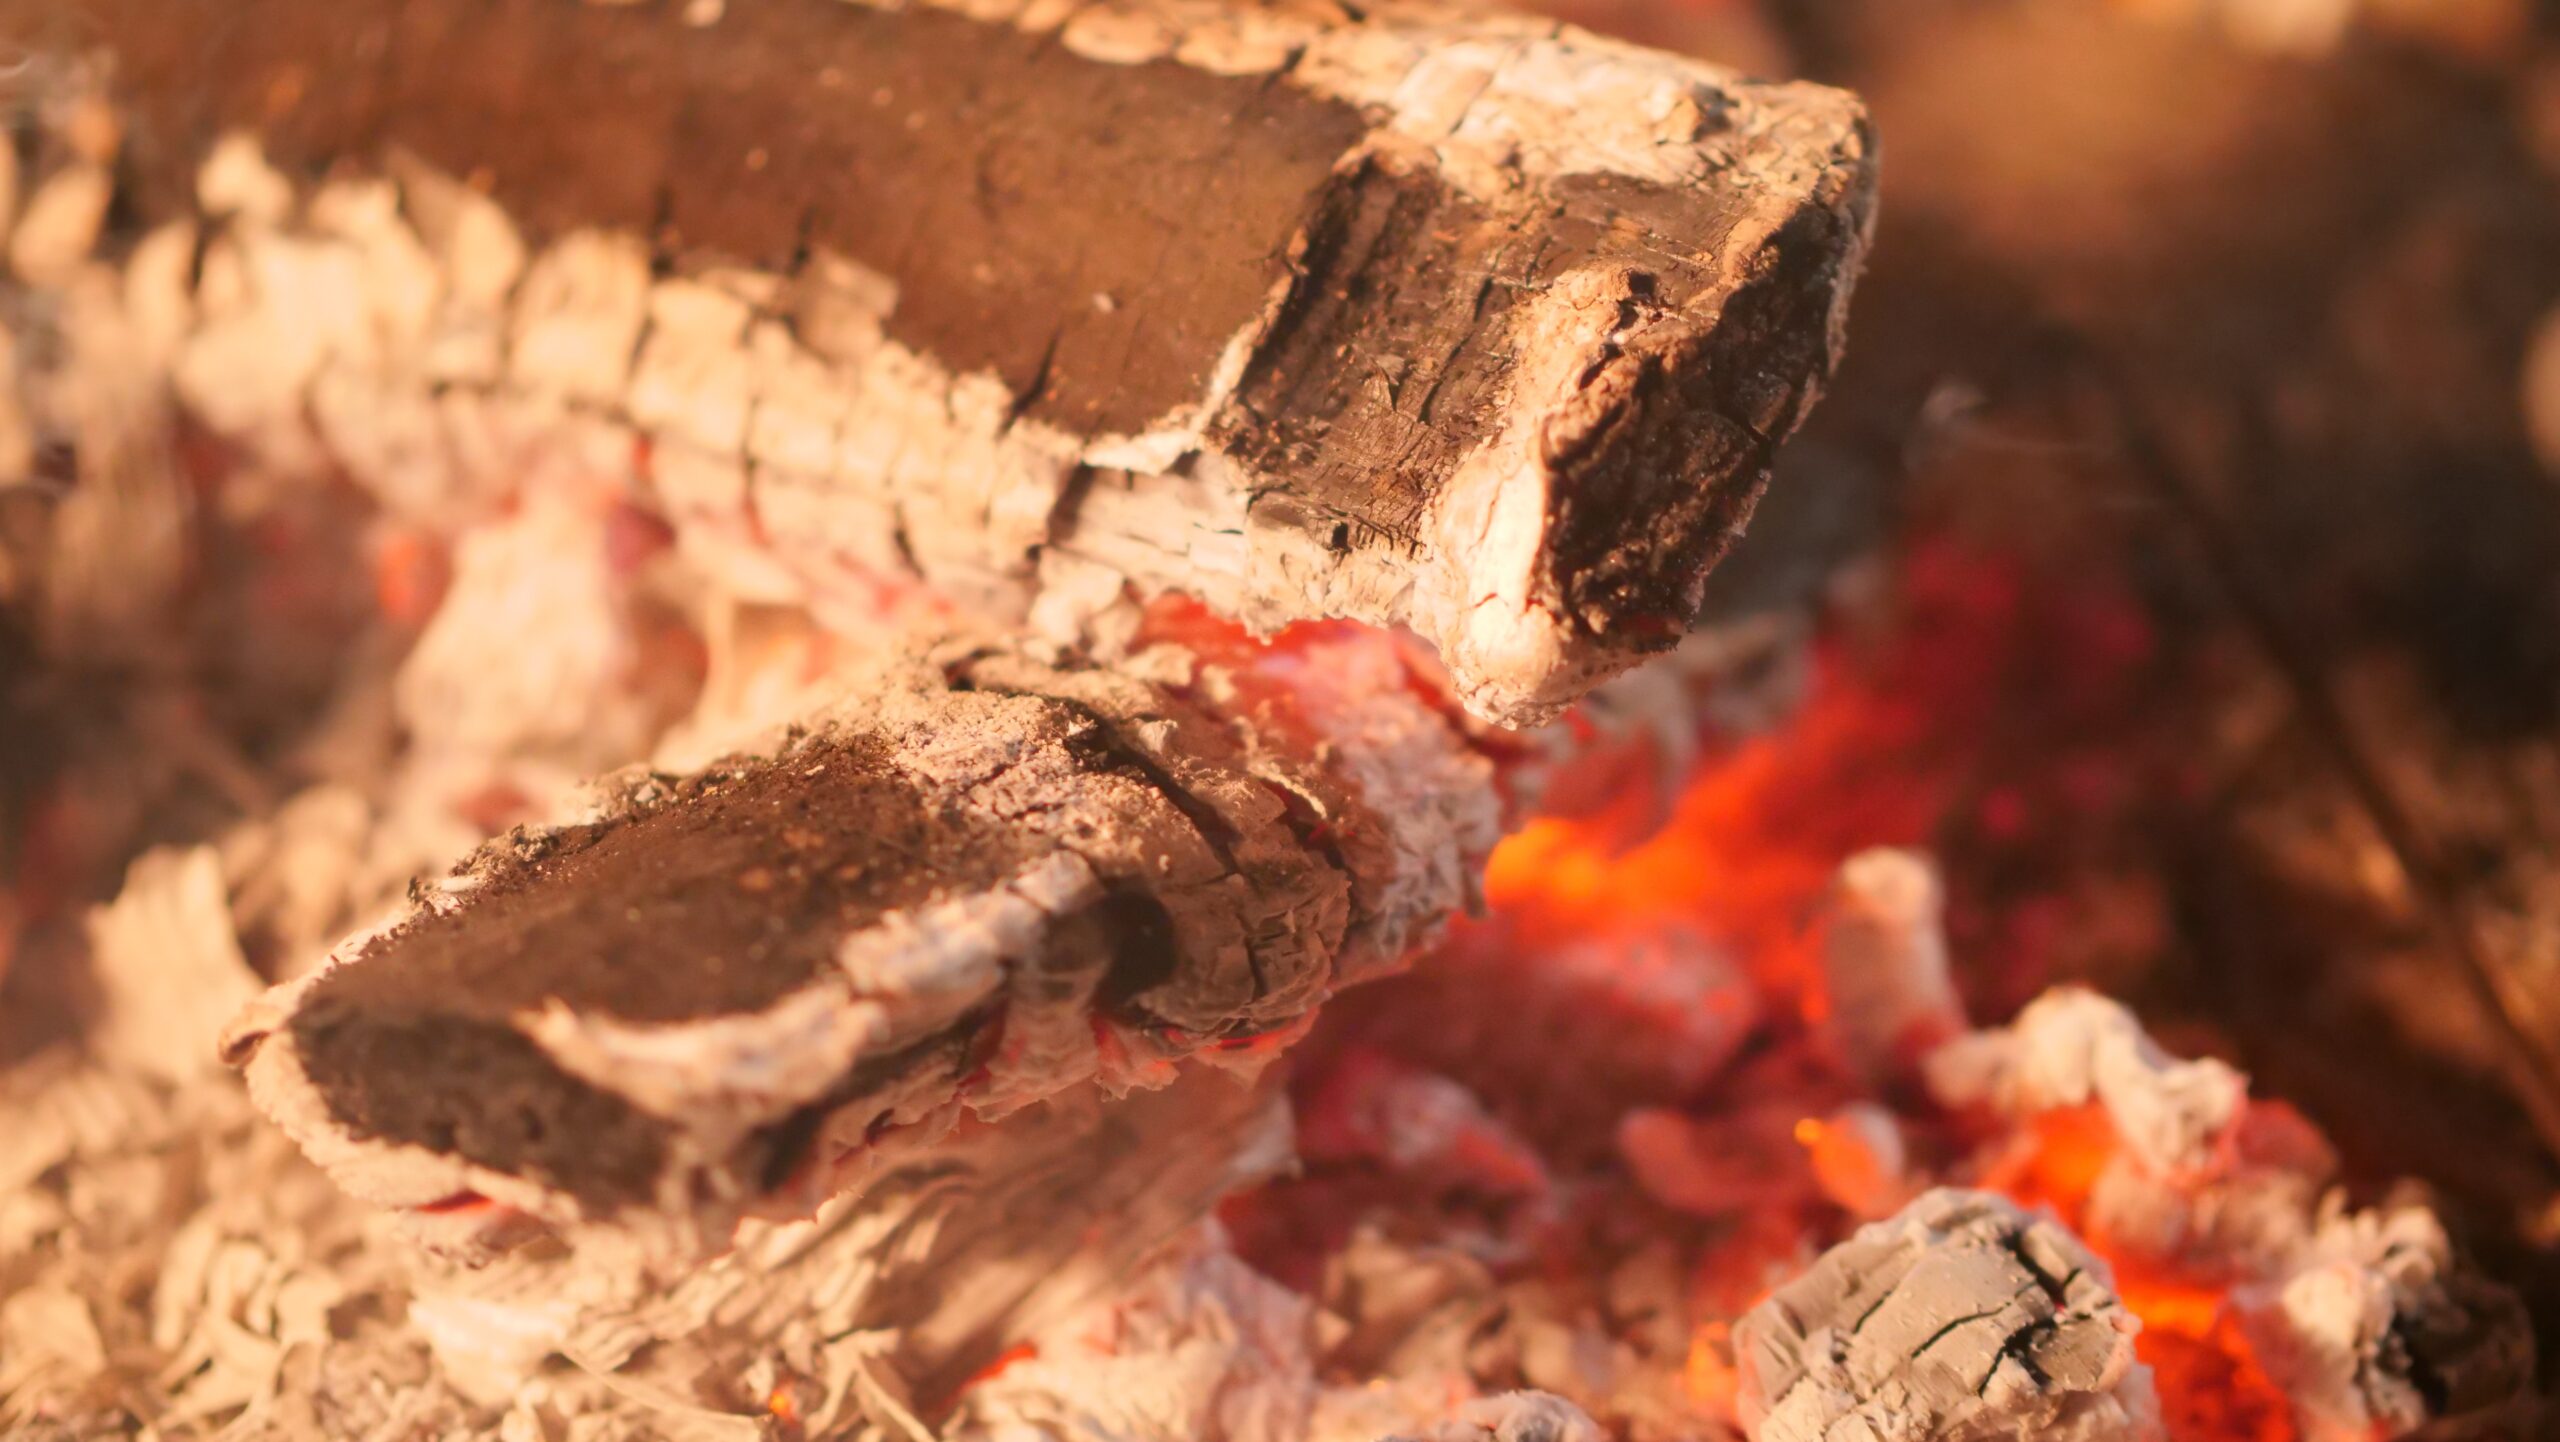 Can You Leave Embers Burning In A Fire Pit?